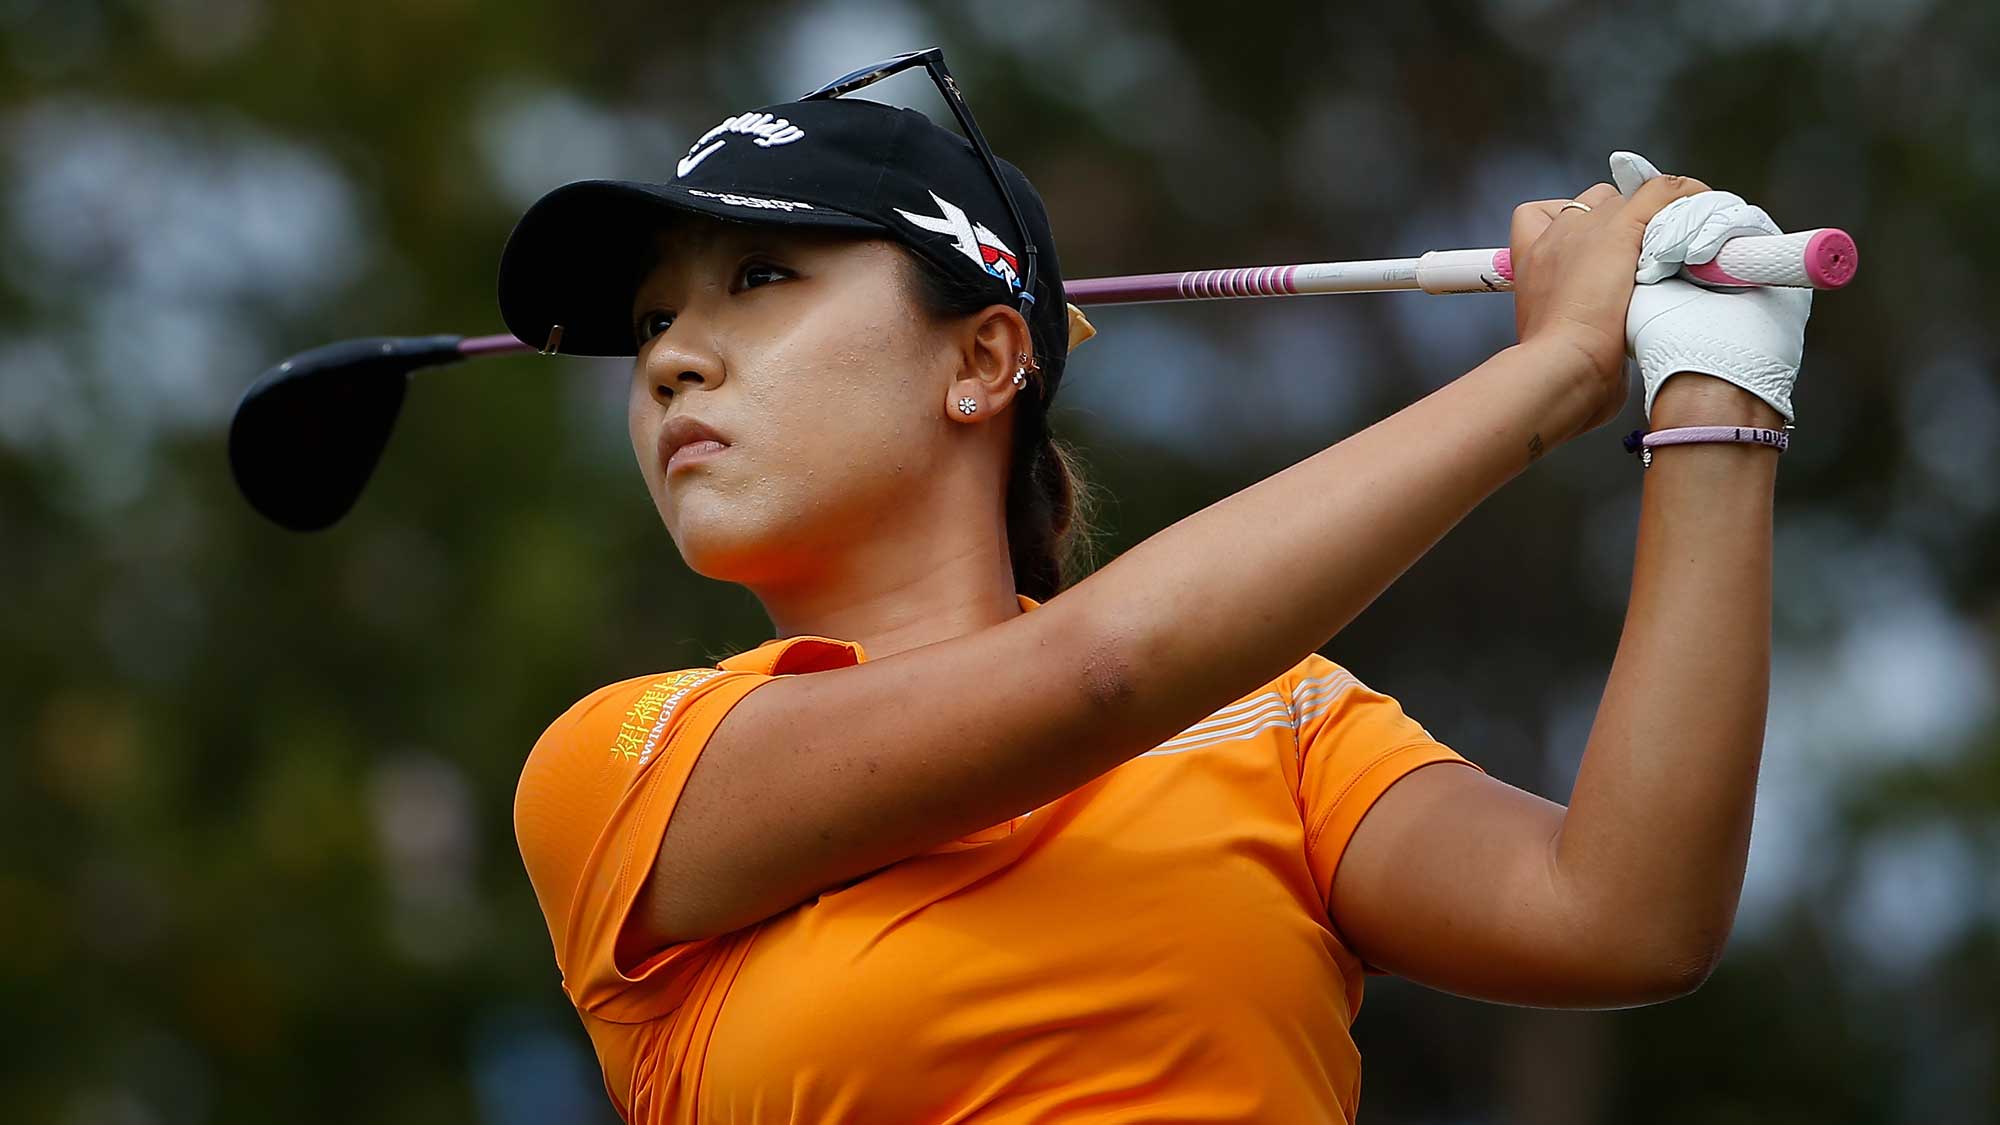  Lydia Ko of New Zealand plays a tee shot on the second hole during the final round of the LPGA LOTTE Championship